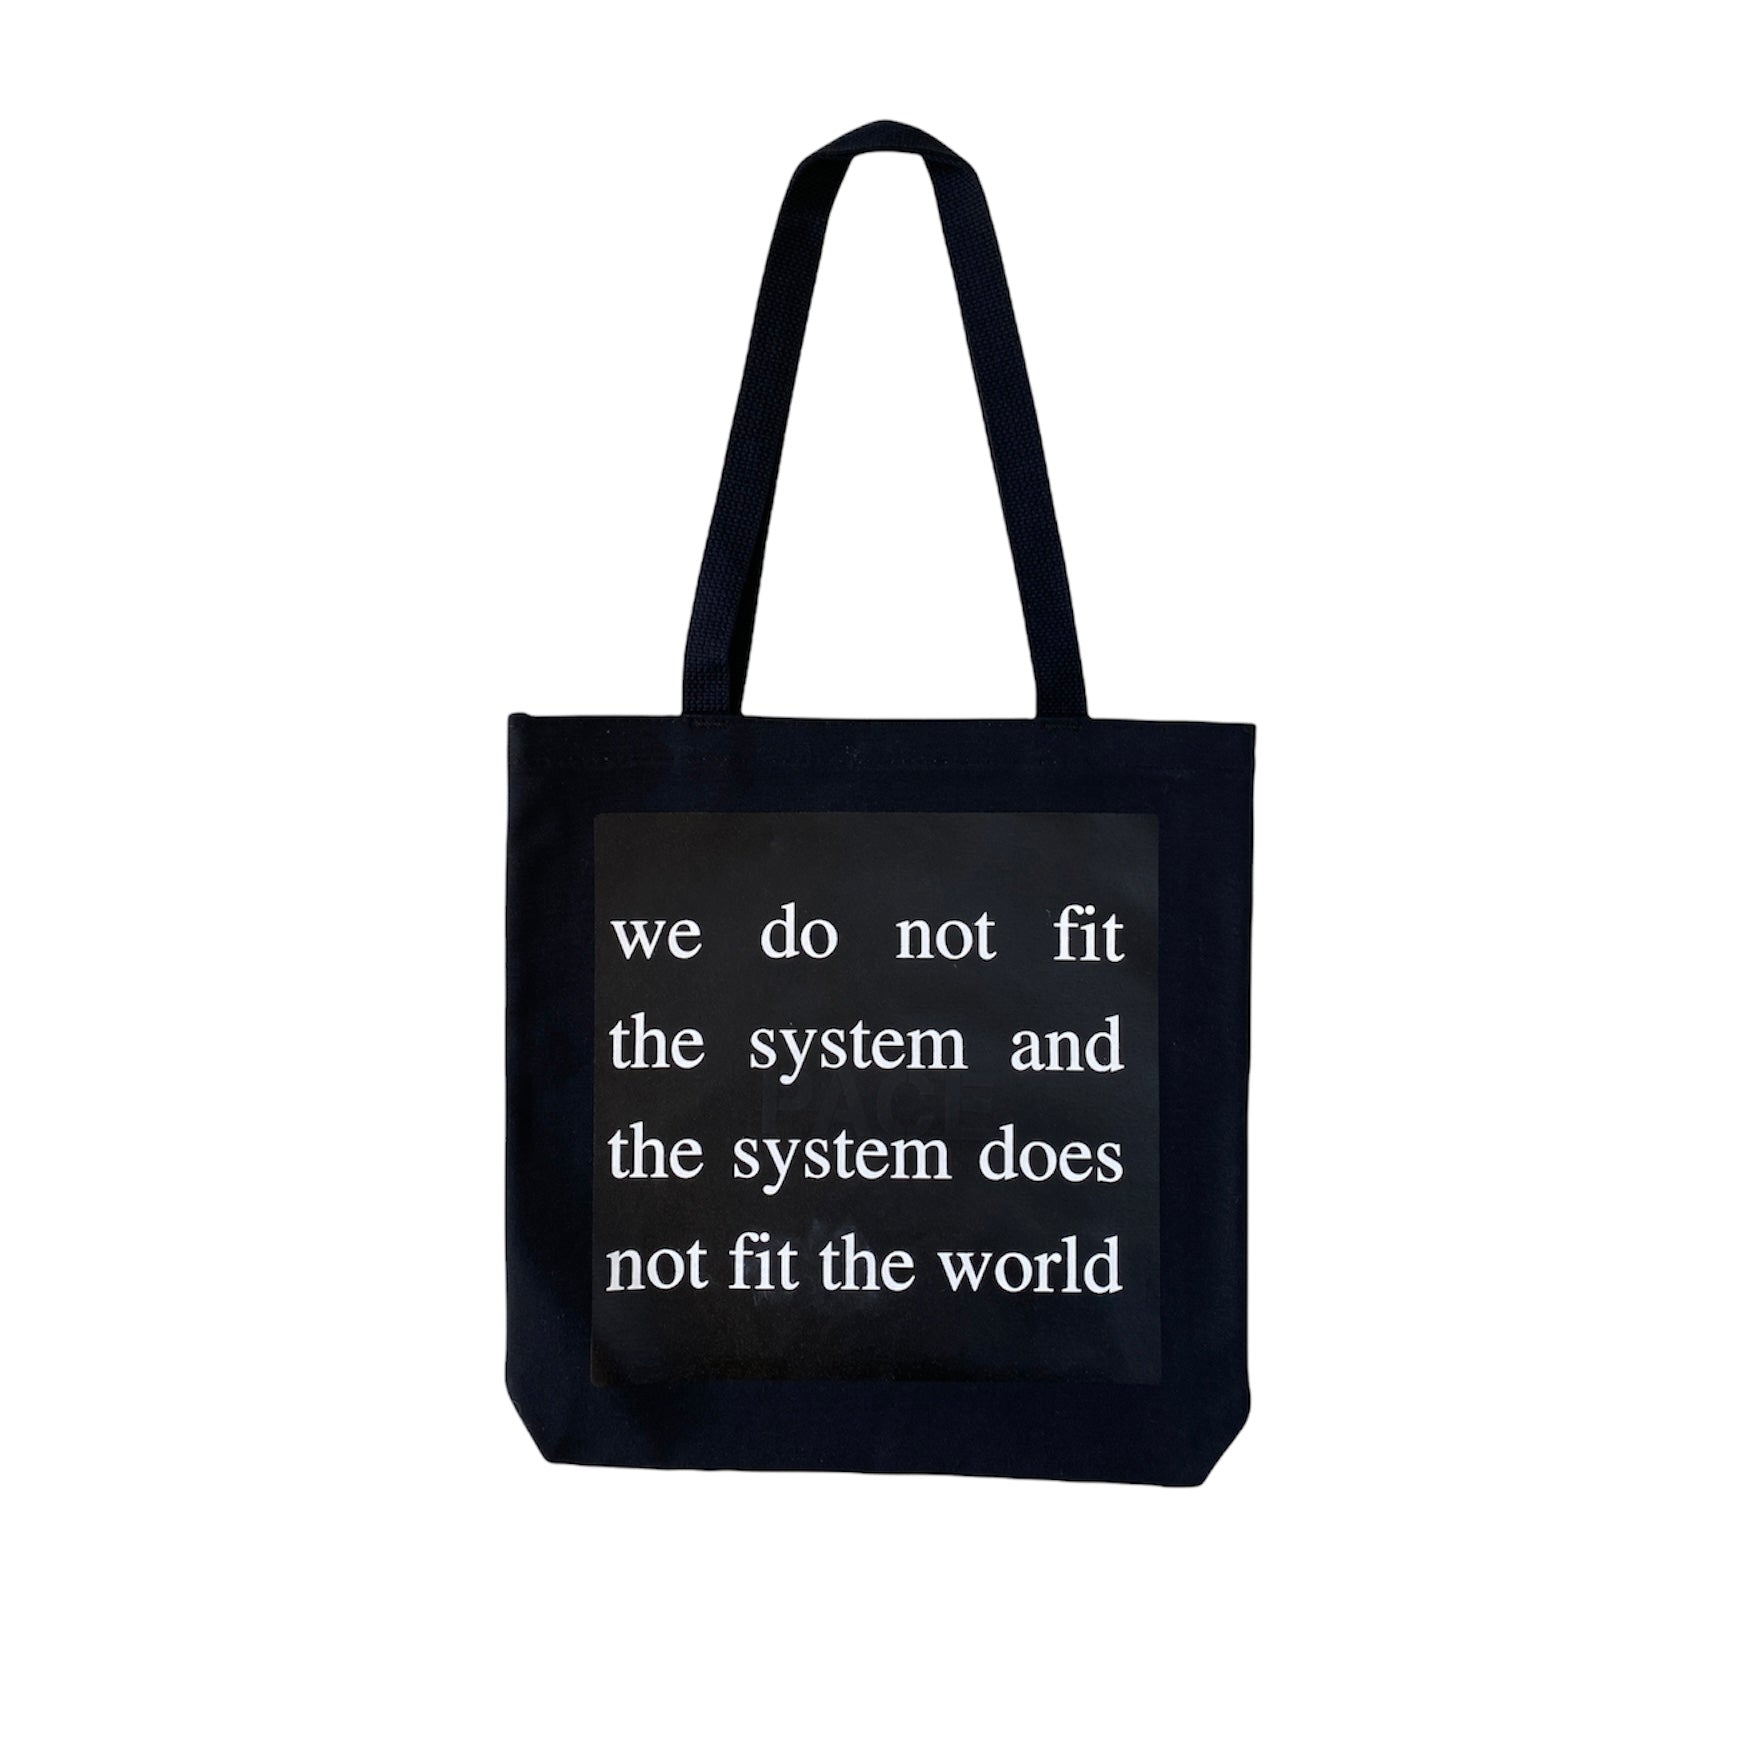 black tote bag with white screen printed text reading we do not fit the system and the system does not fit the world